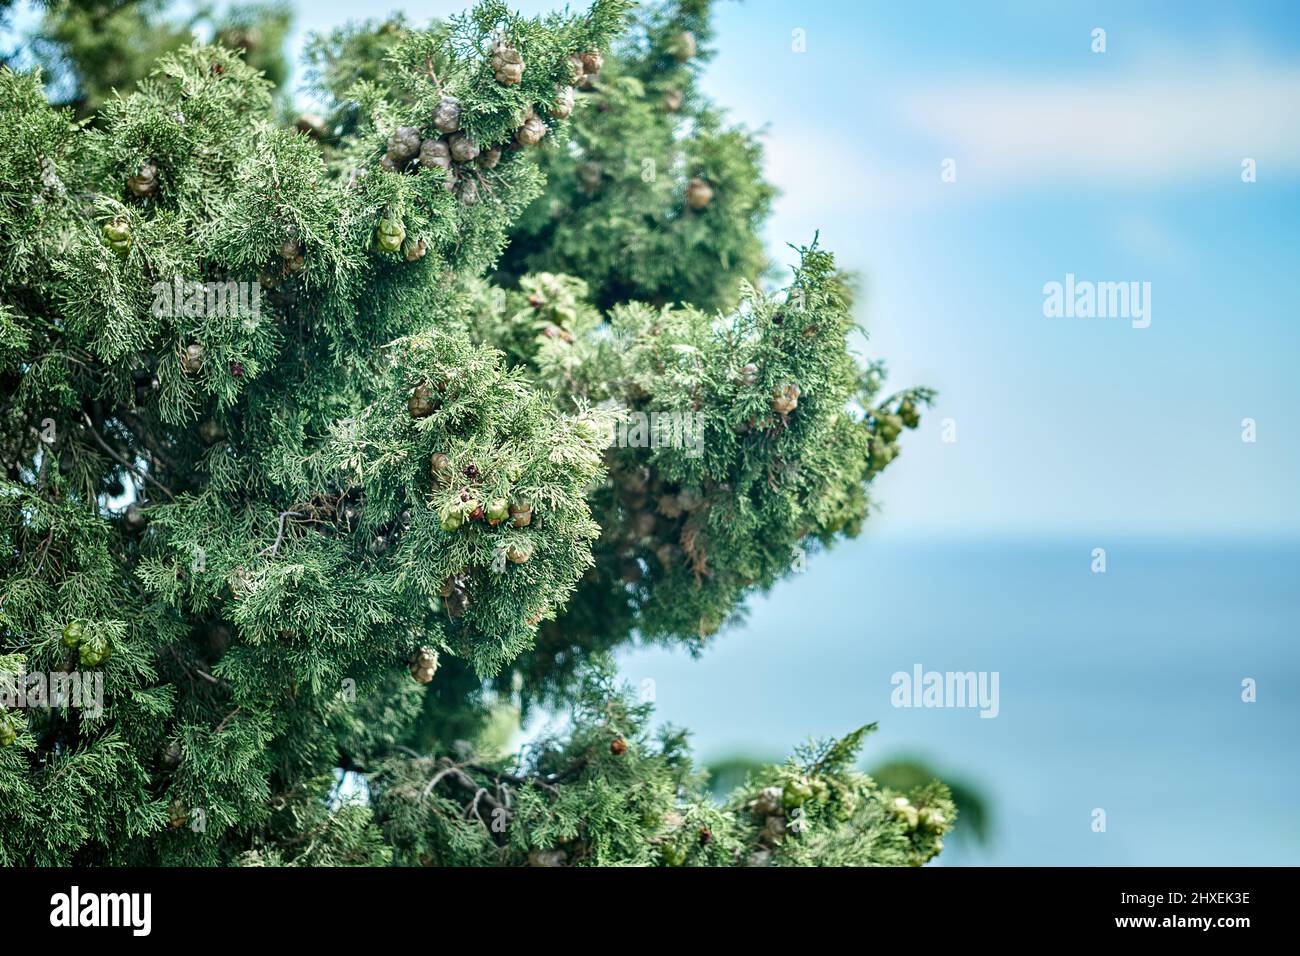 Landscape of high cypress tree with green leaves and cones growing on thin branches against blue sea ripple water under cloudless sky Stock Photo